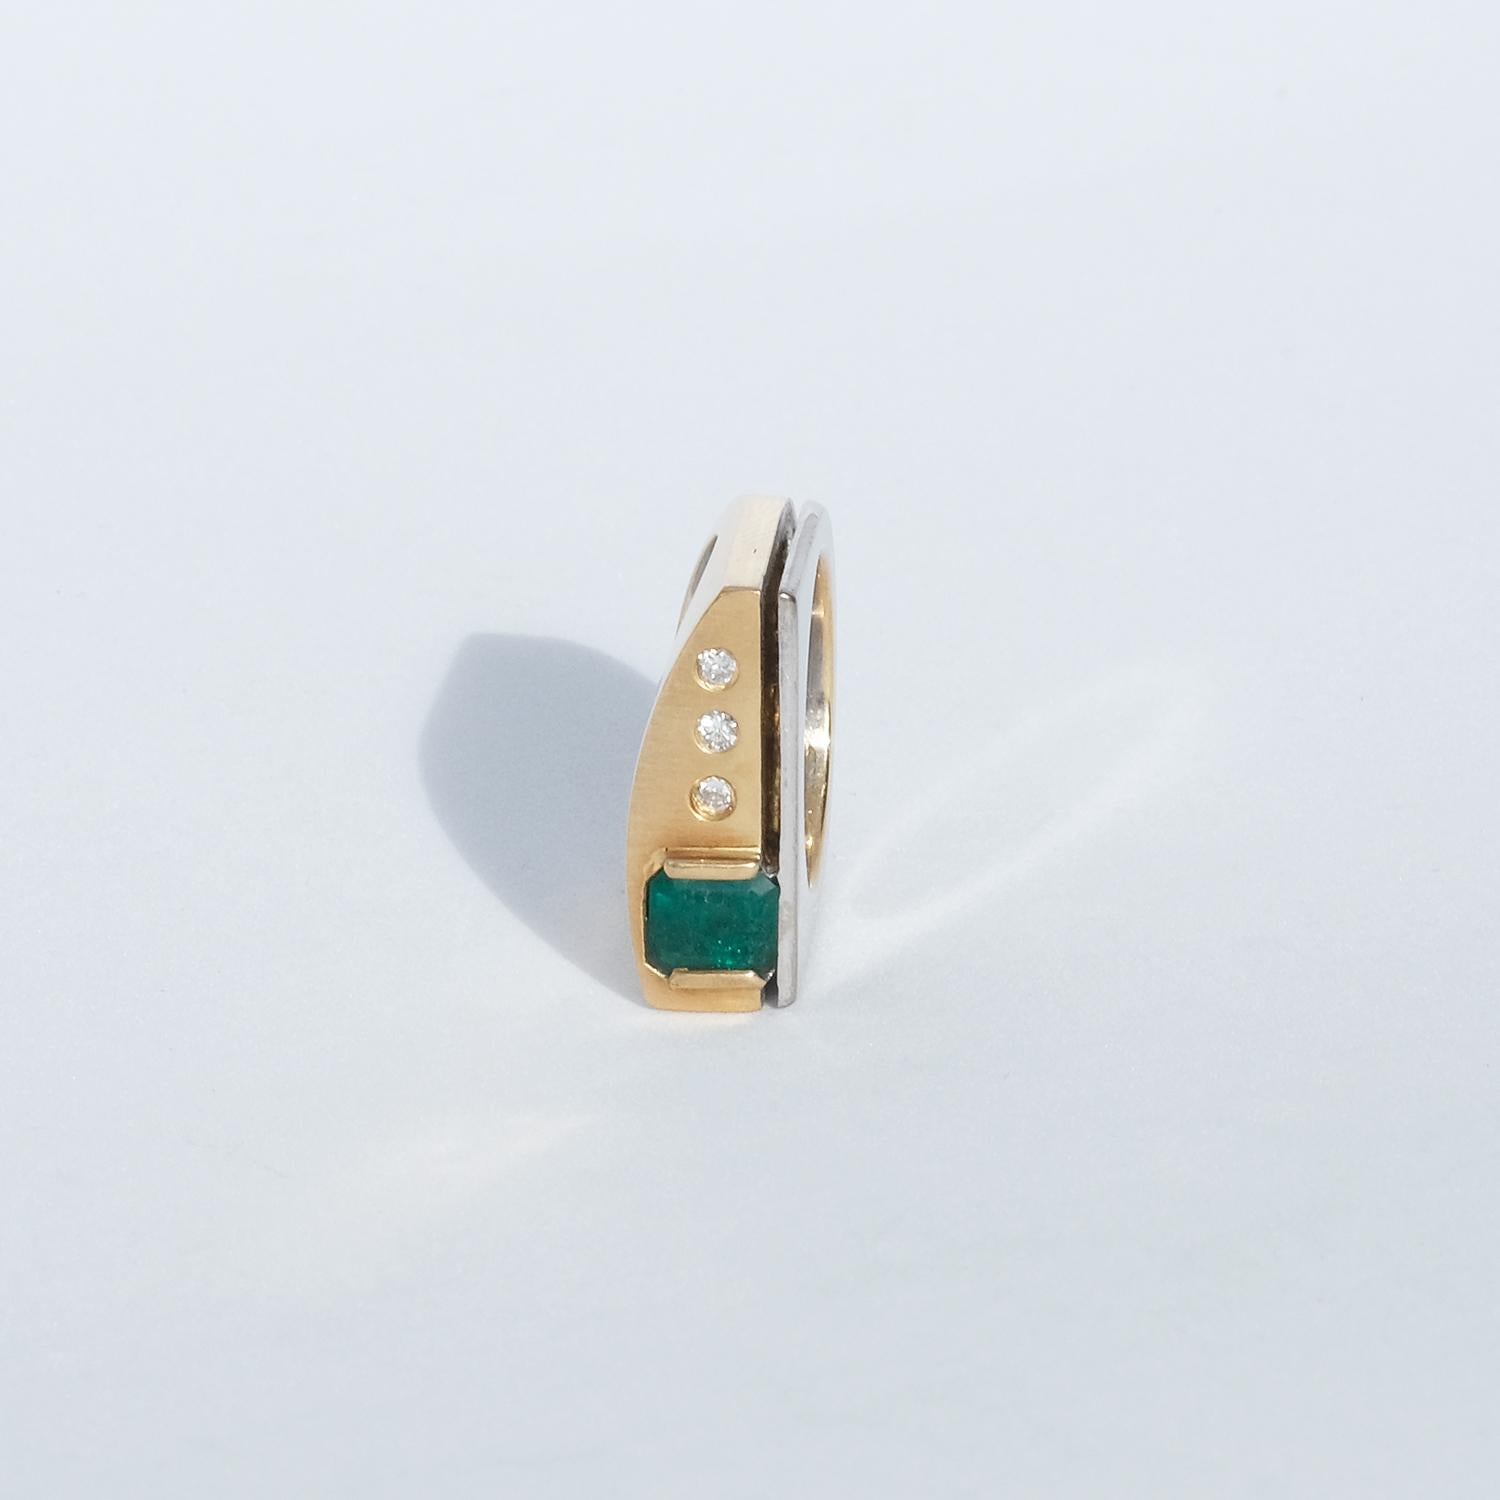 This 18 karat gold and white gold ring has three diamonds and a beautiful faceted emerald. The interesting thing with this ring is the designer's use of both white and yellow gold and the visual effect it creates.

The ring will, depending on your